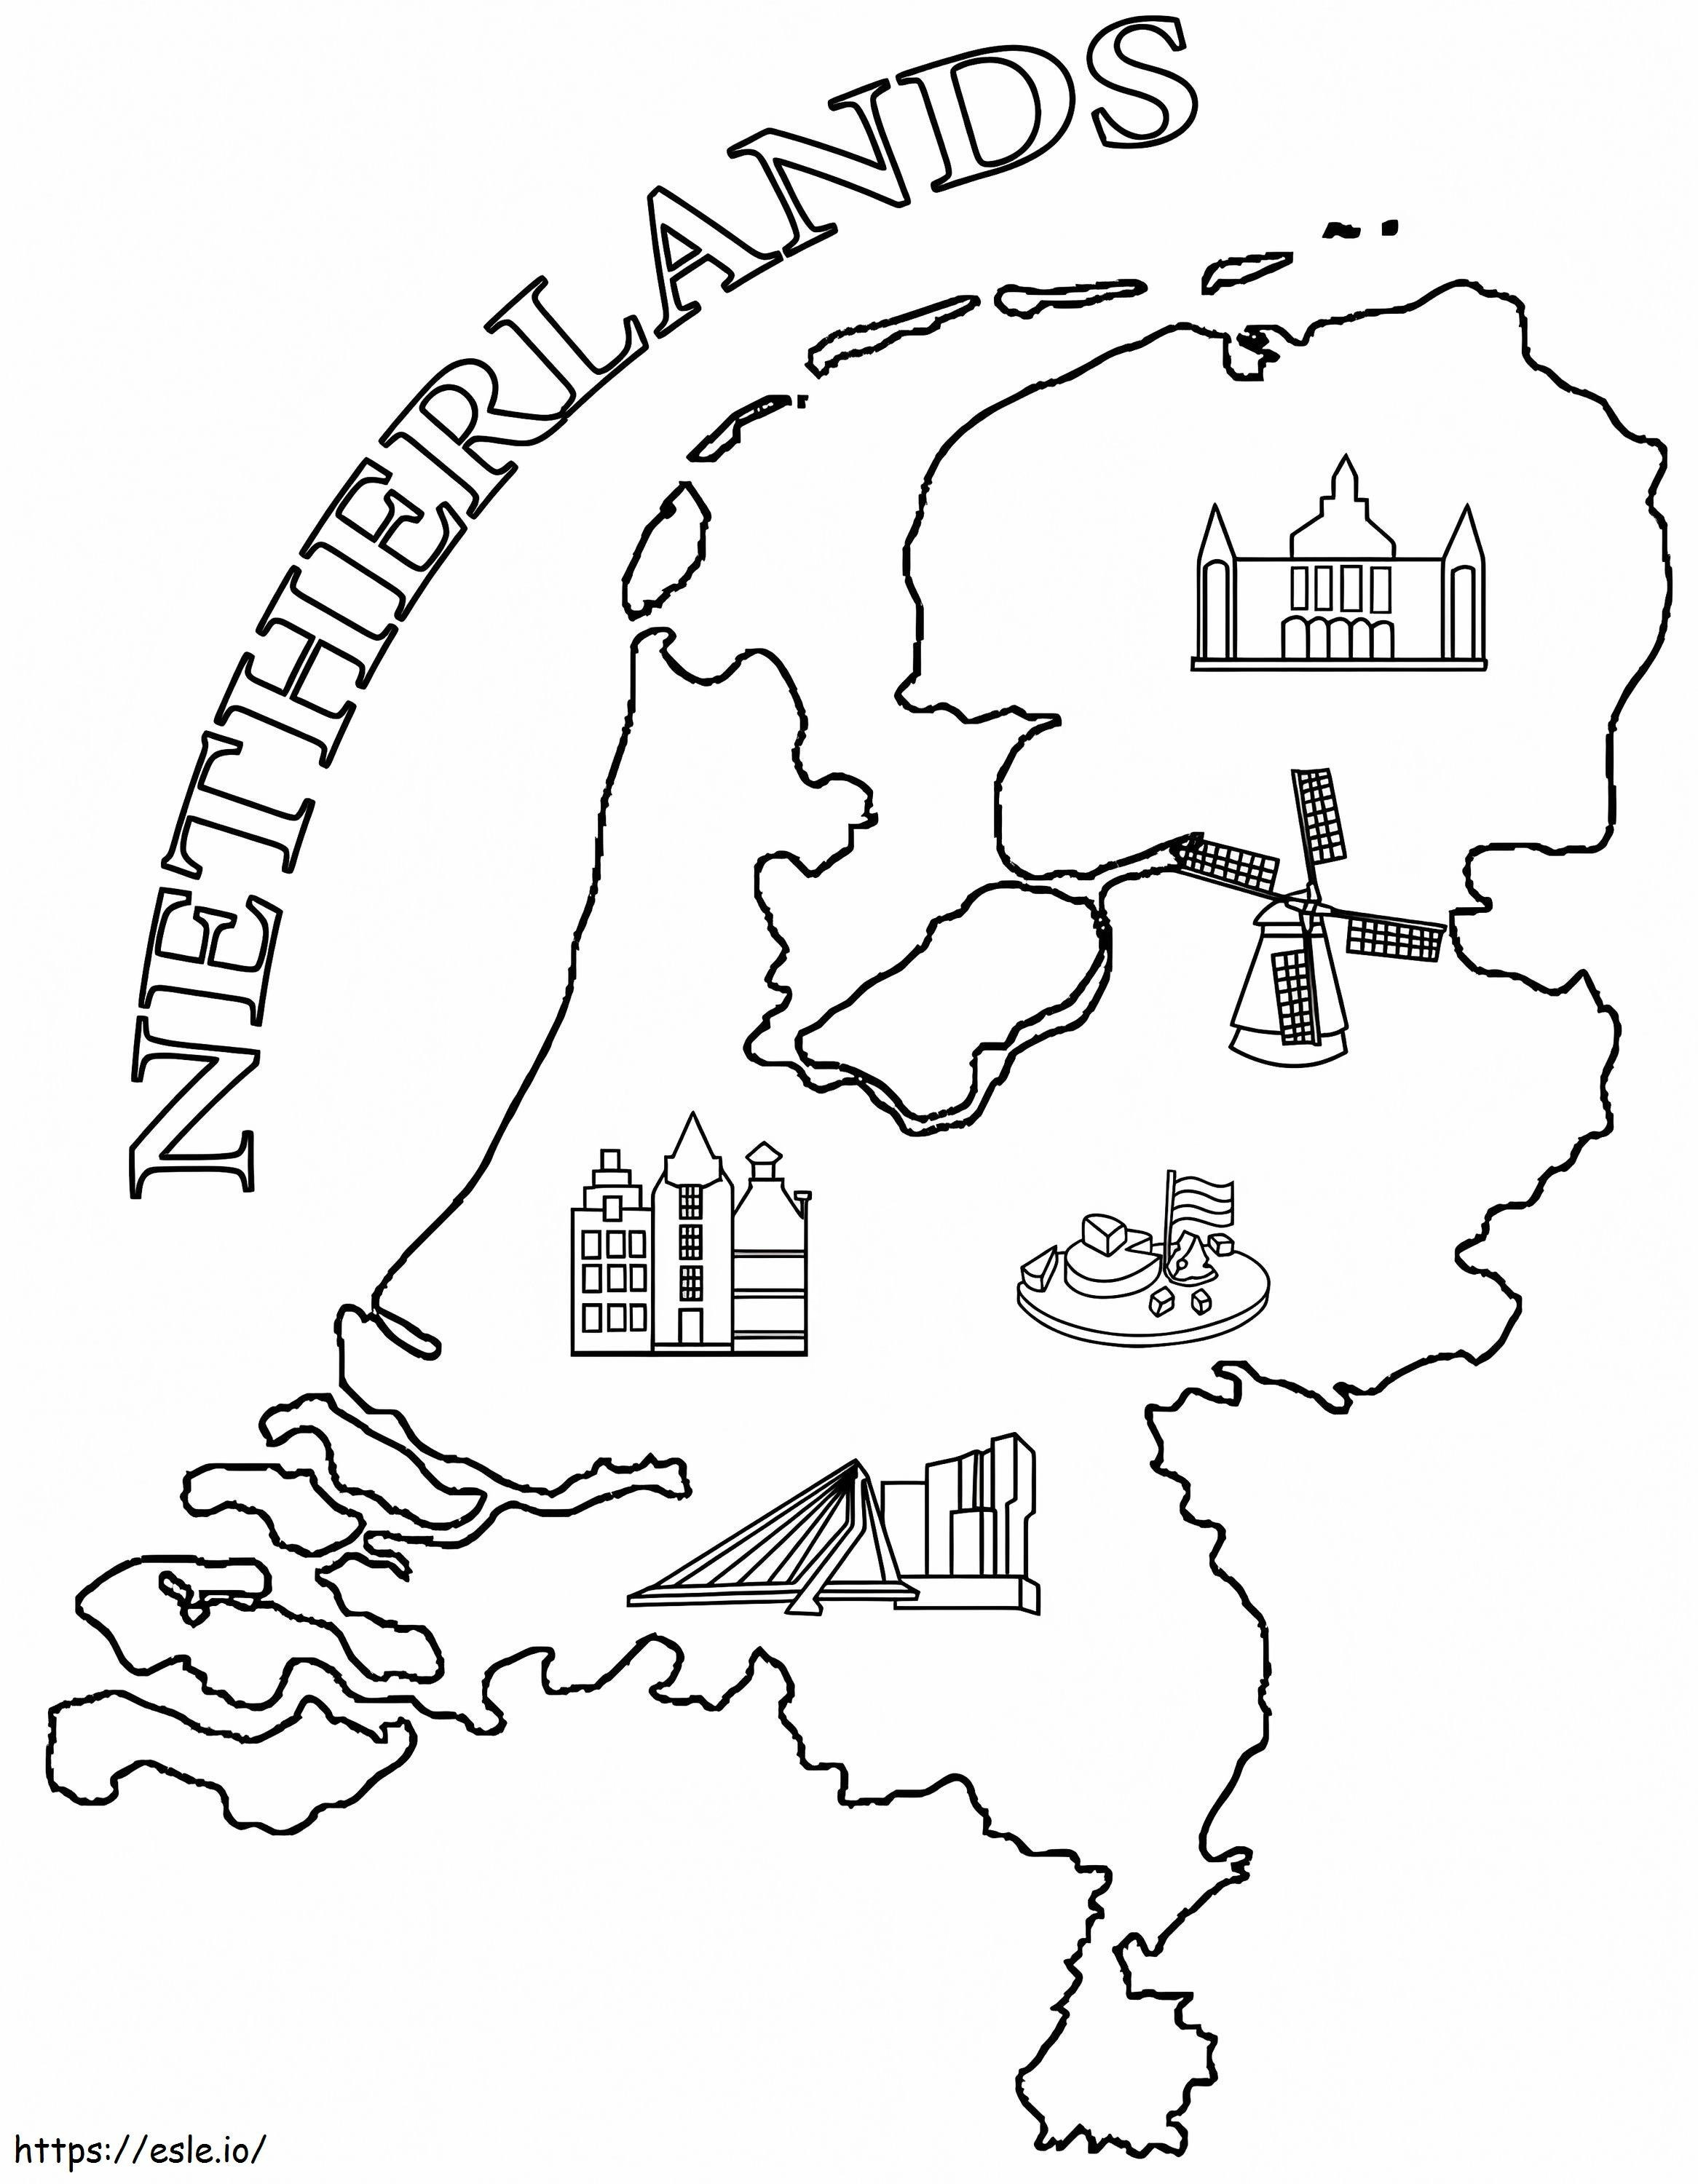 Netherlands Map 1 coloring page